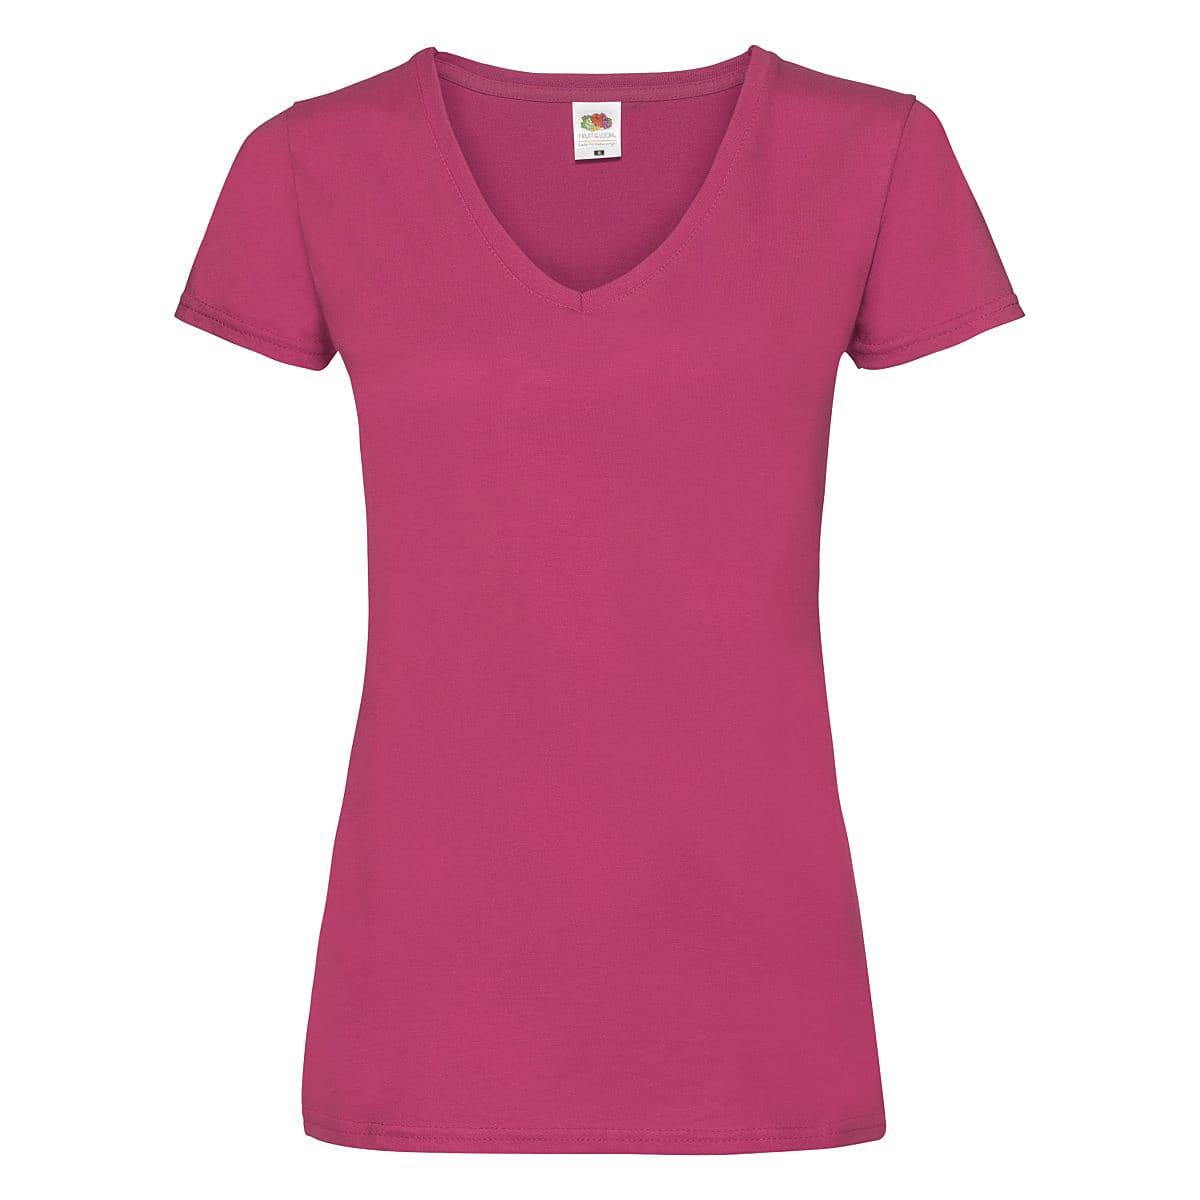 Fruit Of The Loom Lady-Fit Valueweight V-Neck T-Shirt in Fuchsia (Product Code: 61398)